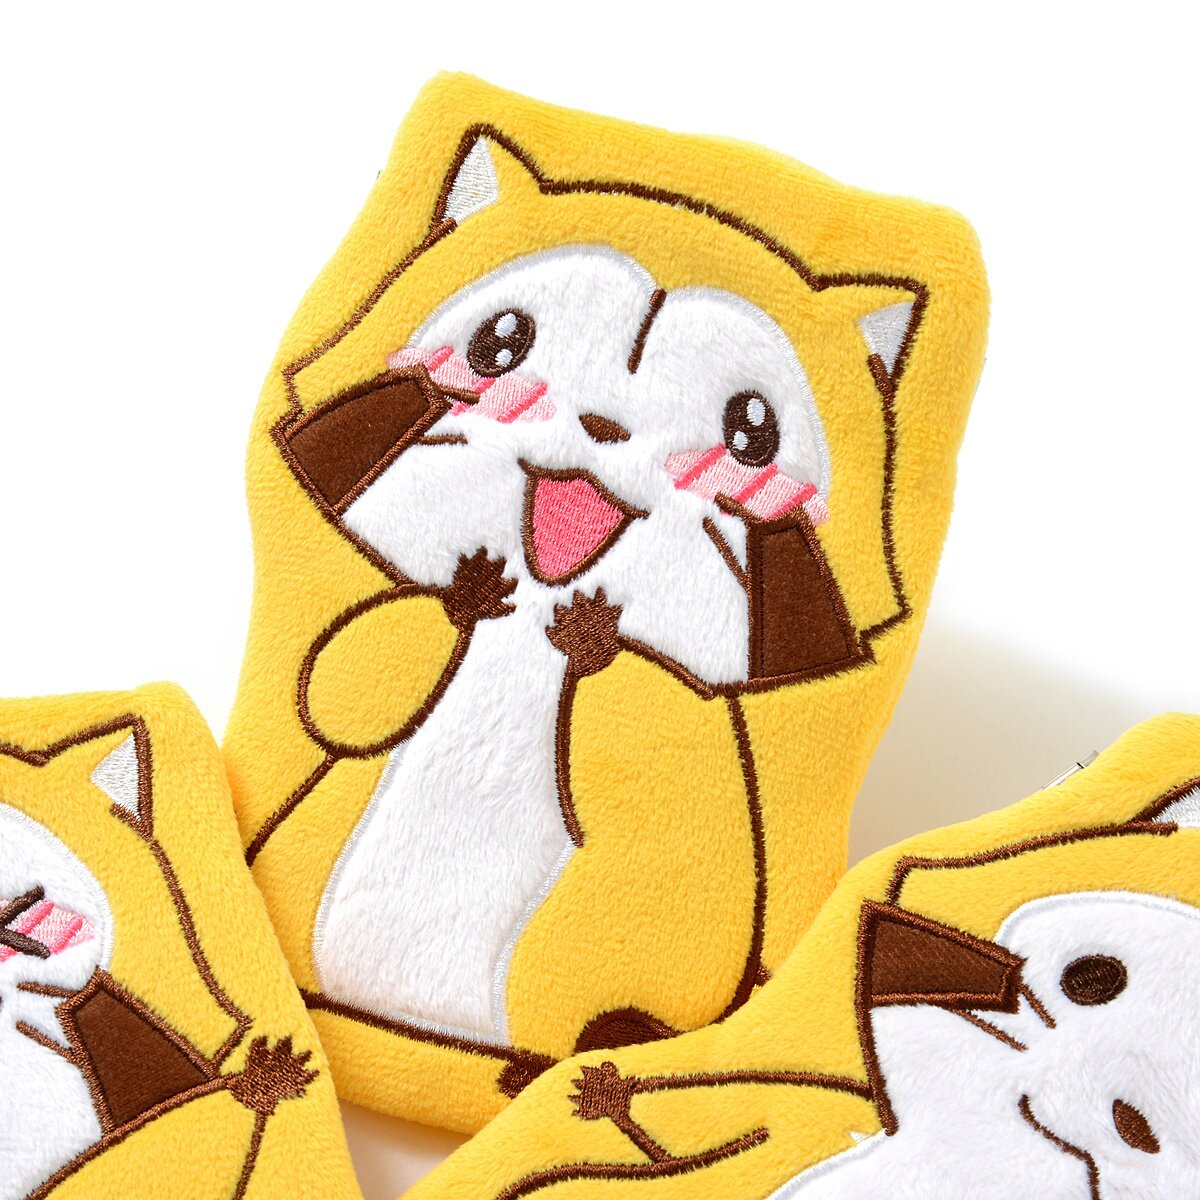 Tokyo Revengers and Rascal the Raccoon Collaboration Goods Coming in August, MOSHI MOSHI NIPPON